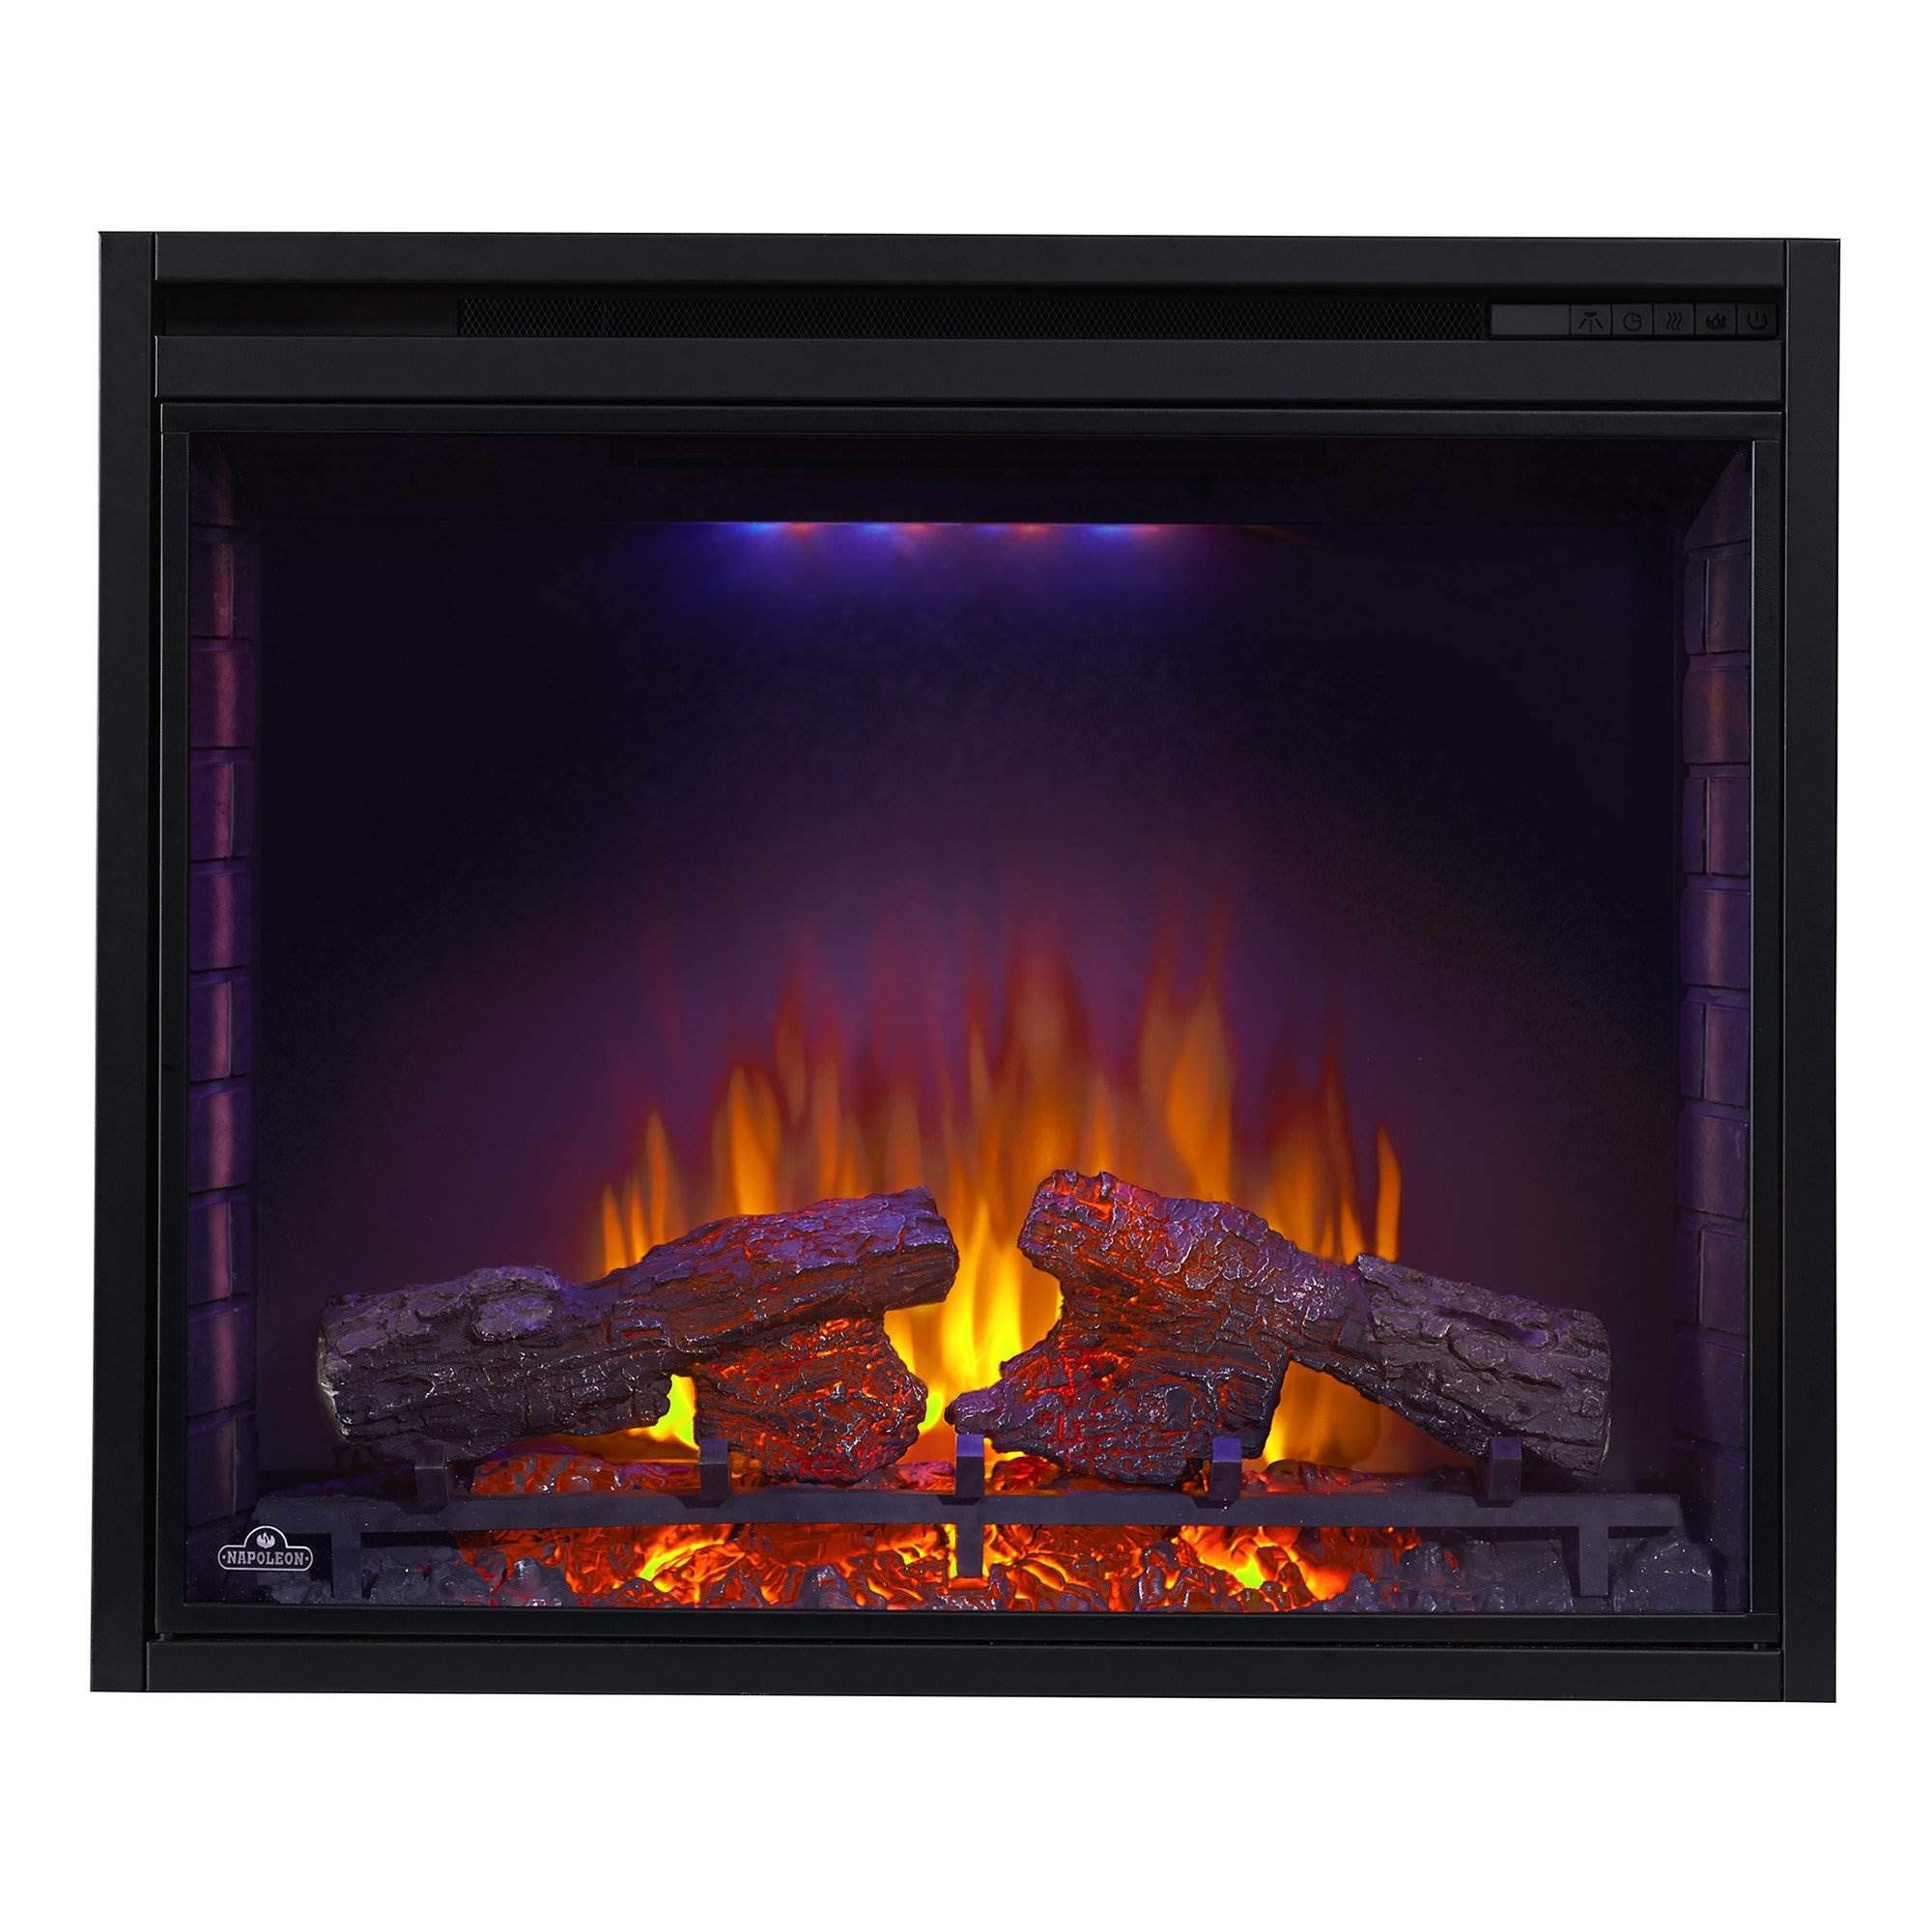 Napoleon Ascent 33 - NEFB33H - Built-in Electric Fireplace, 33-in, Realistic Logs & Flames, Self Trimming, Remote Included